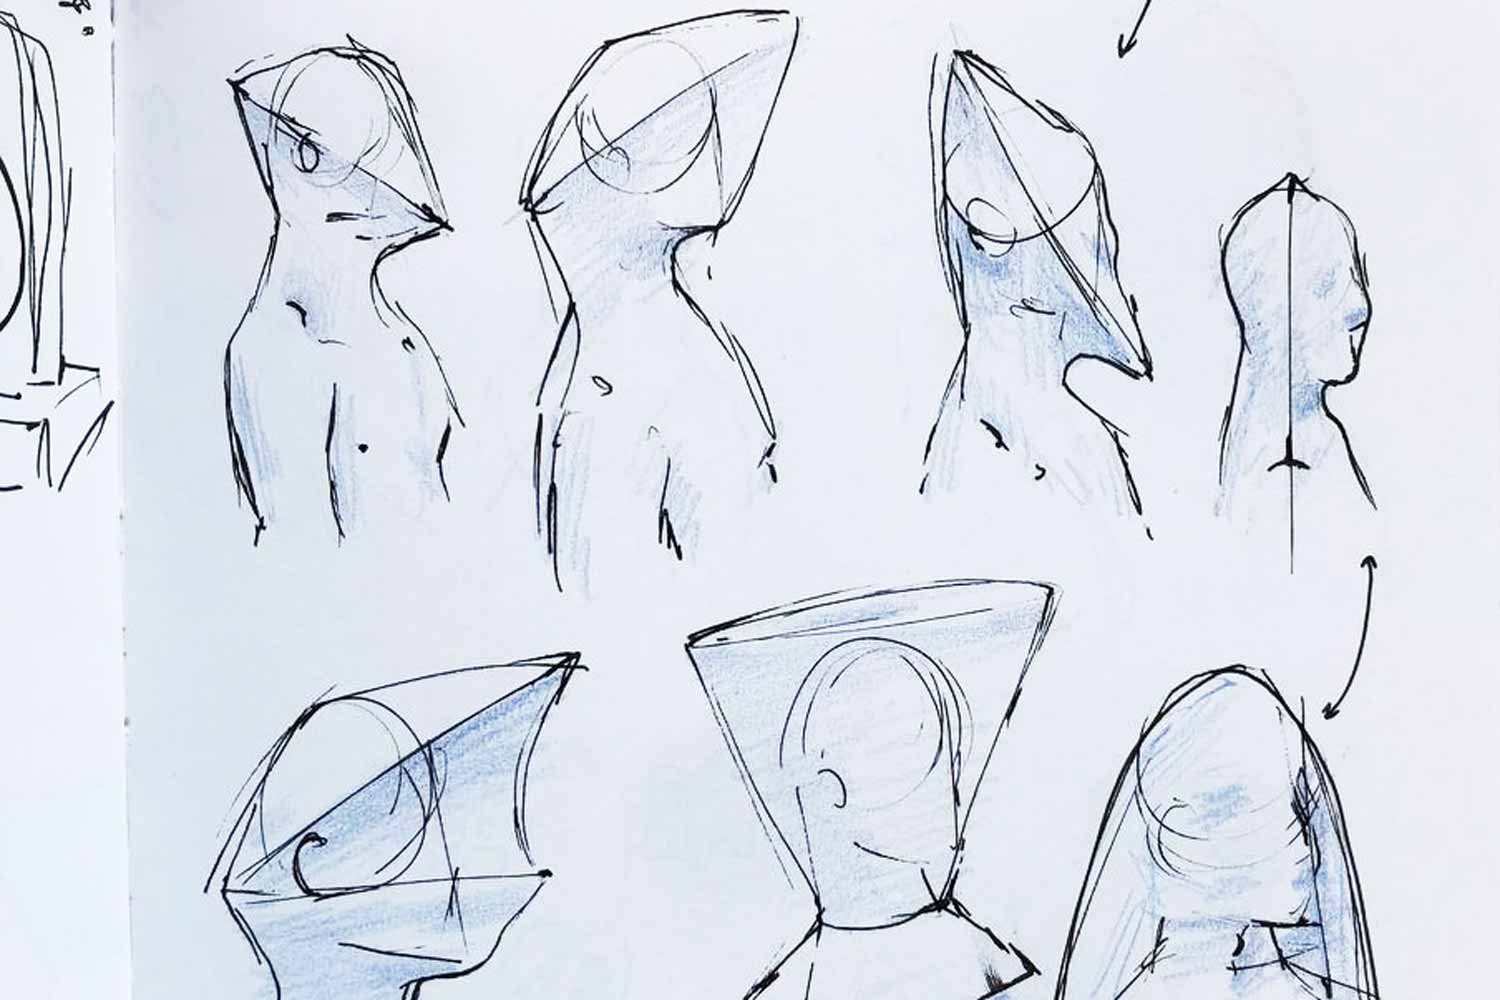 Design sketches of the headgear